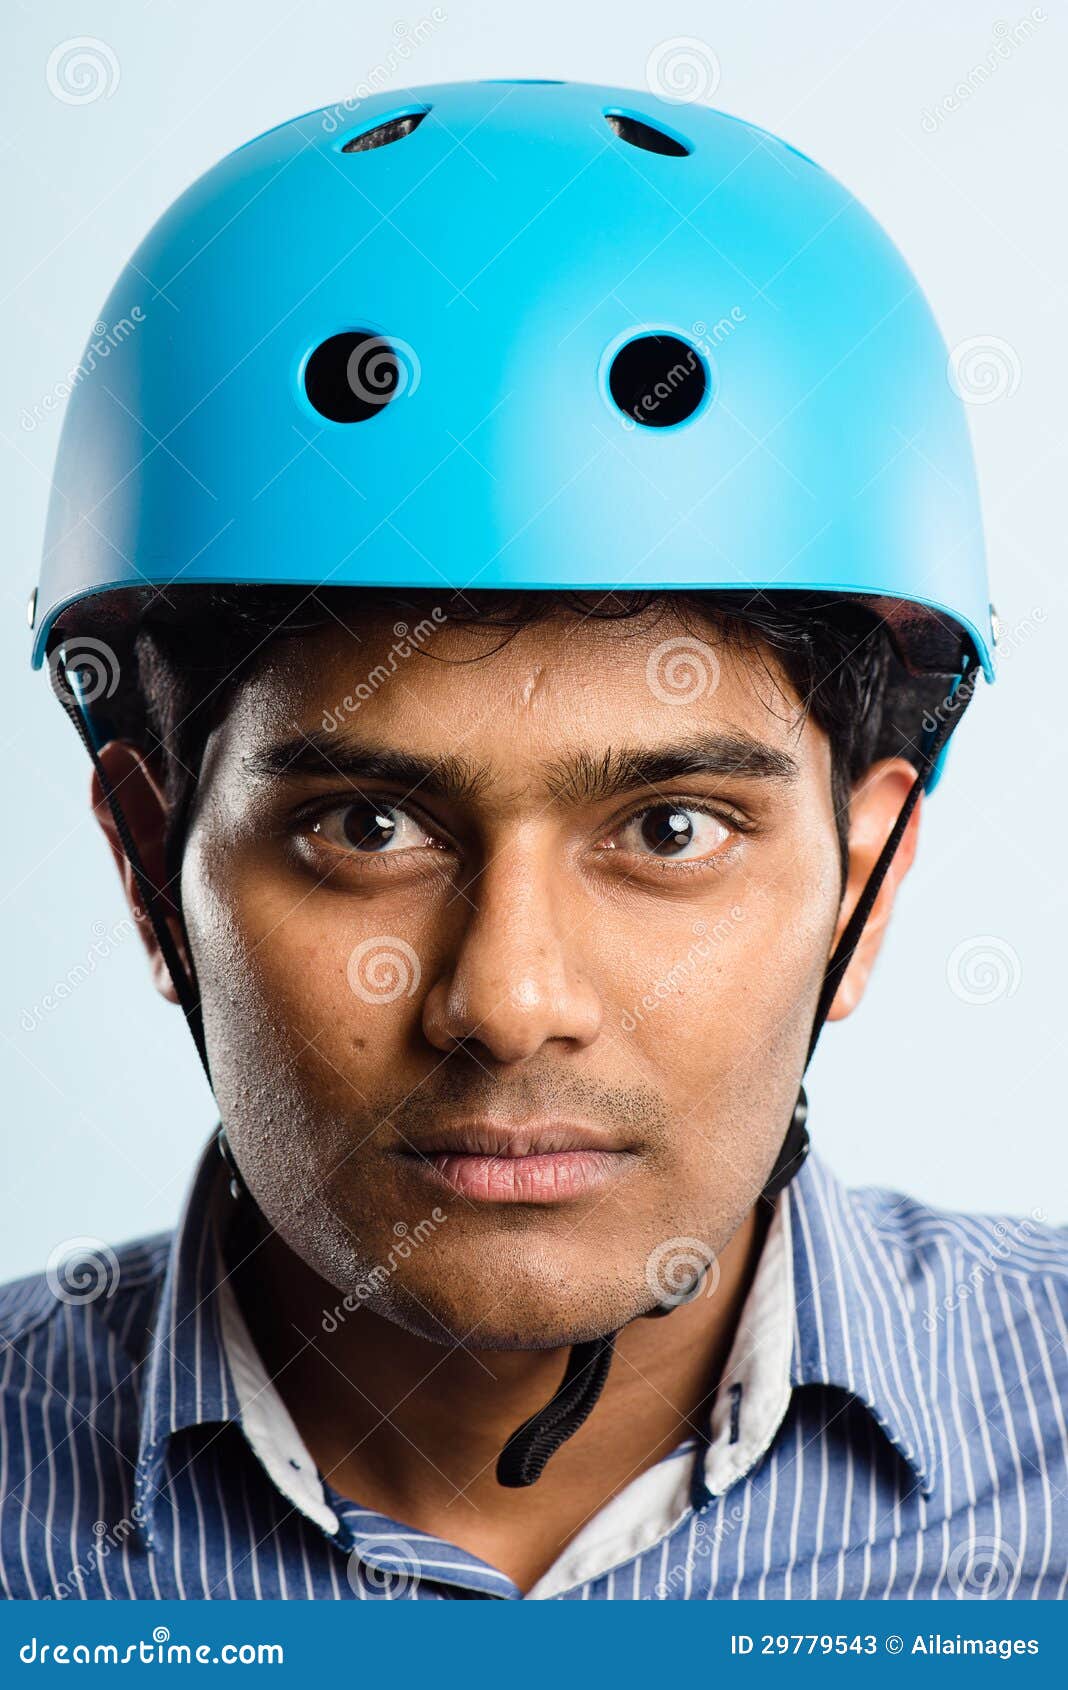 Funny Man Wearing Cycling Helmet Portrait Real People High Definition Blue  Background Stock Image - Image of indian, hair: 29779543